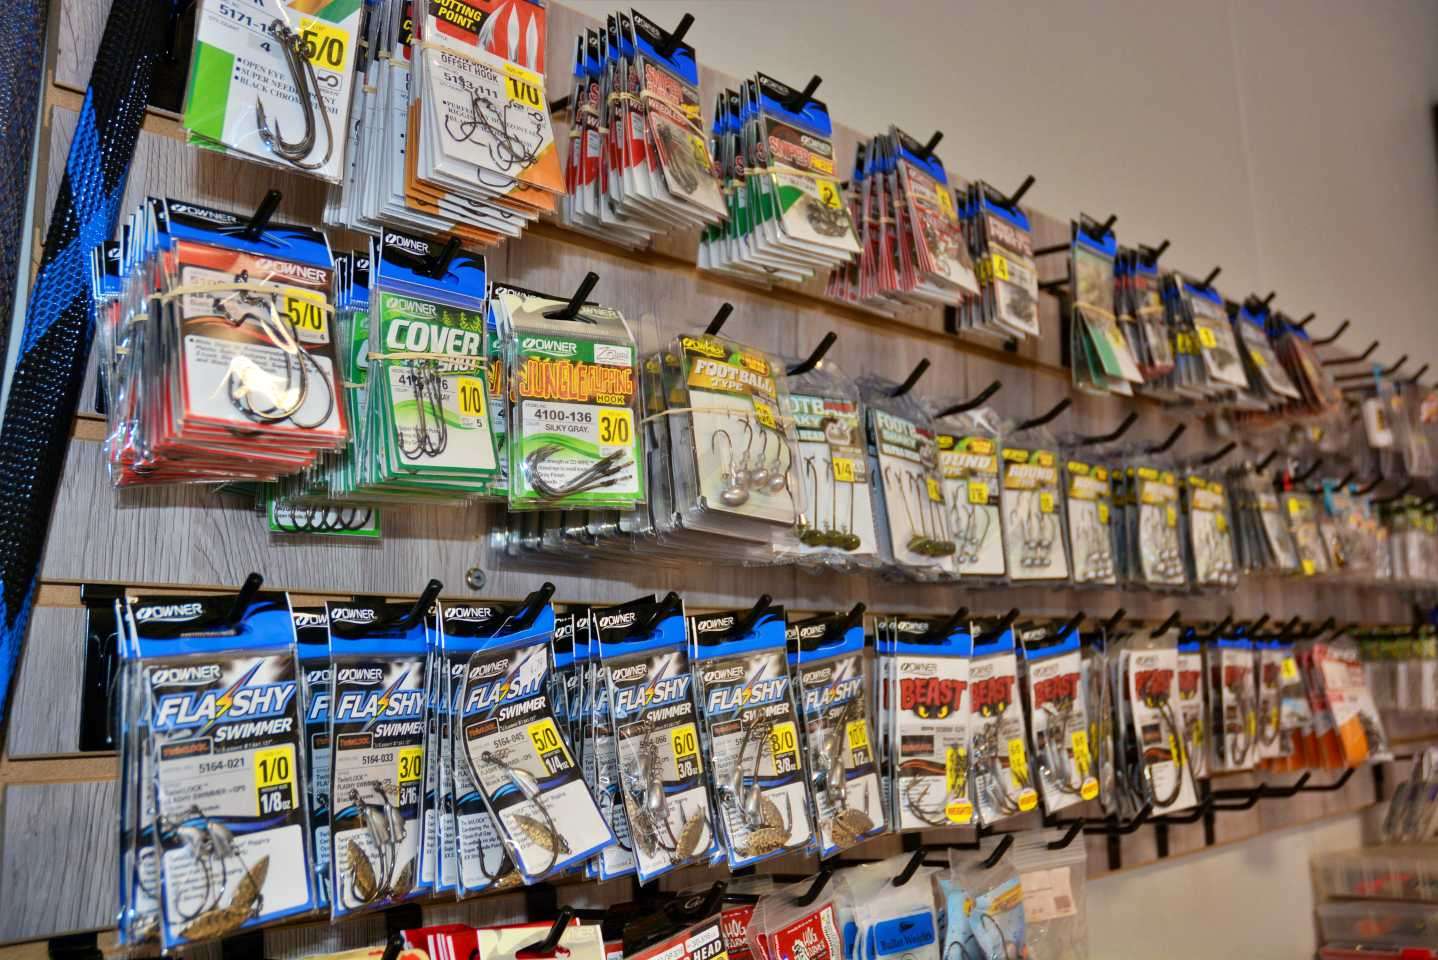 Owner hooks, jigs and blades line the wall and are longtime favorites. âI sold Owner products when I worked in a tackle shop back home in Australia. I have always relied on them ever since.â The good news is Owner is a new sponsor for 2020. 